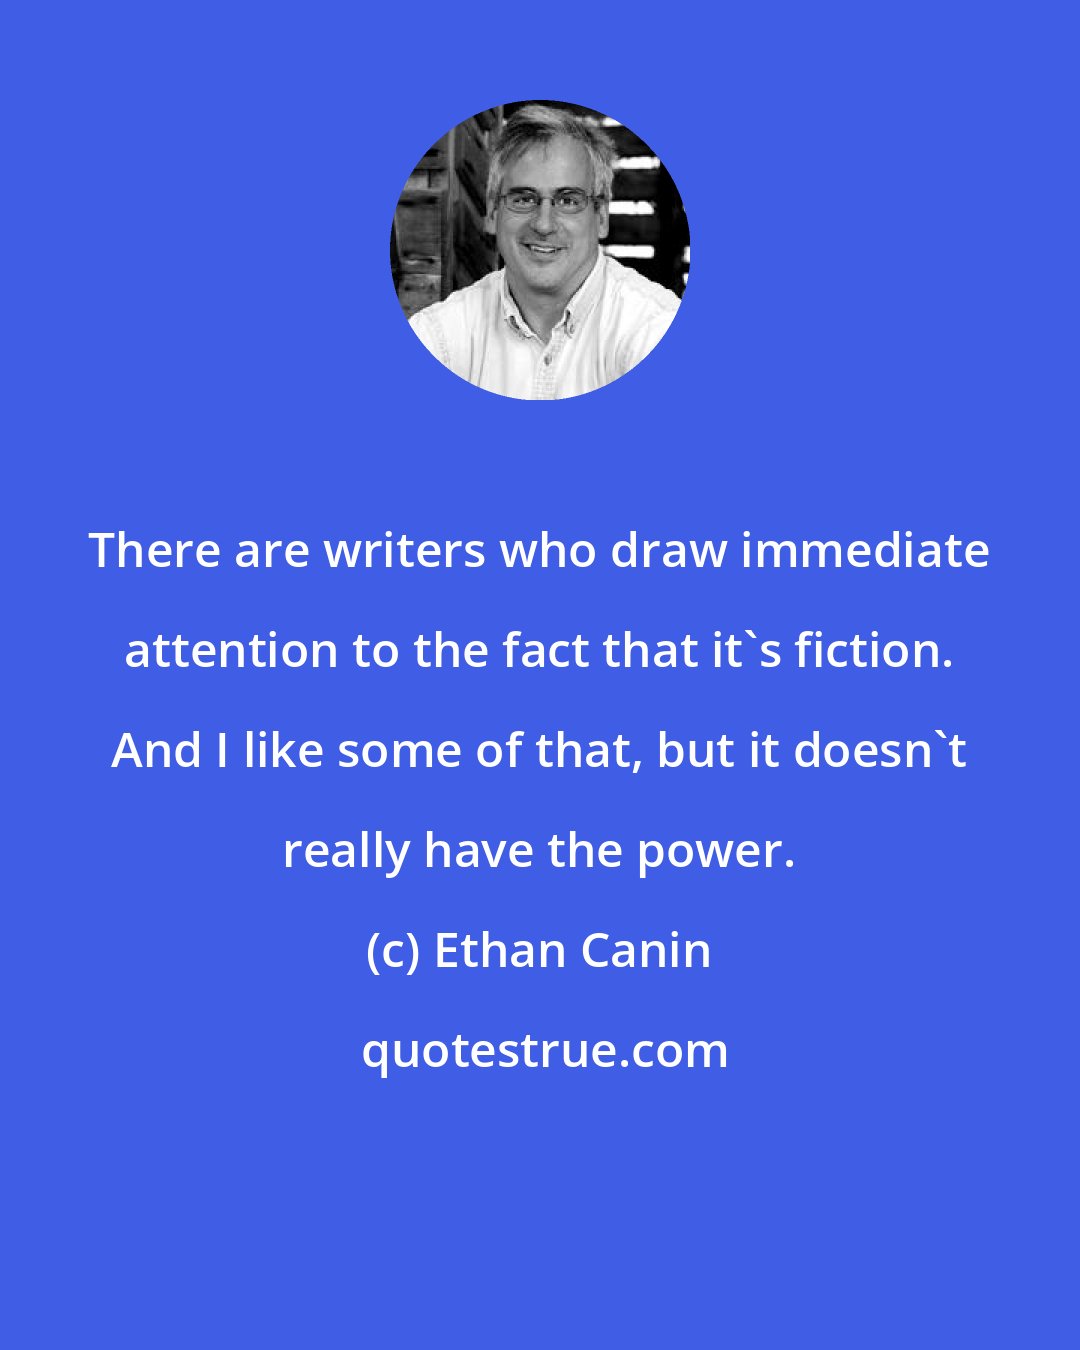 Ethan Canin: There are writers who draw immediate attention to the fact that it's fiction. And I like some of that, but it doesn't really have the power.